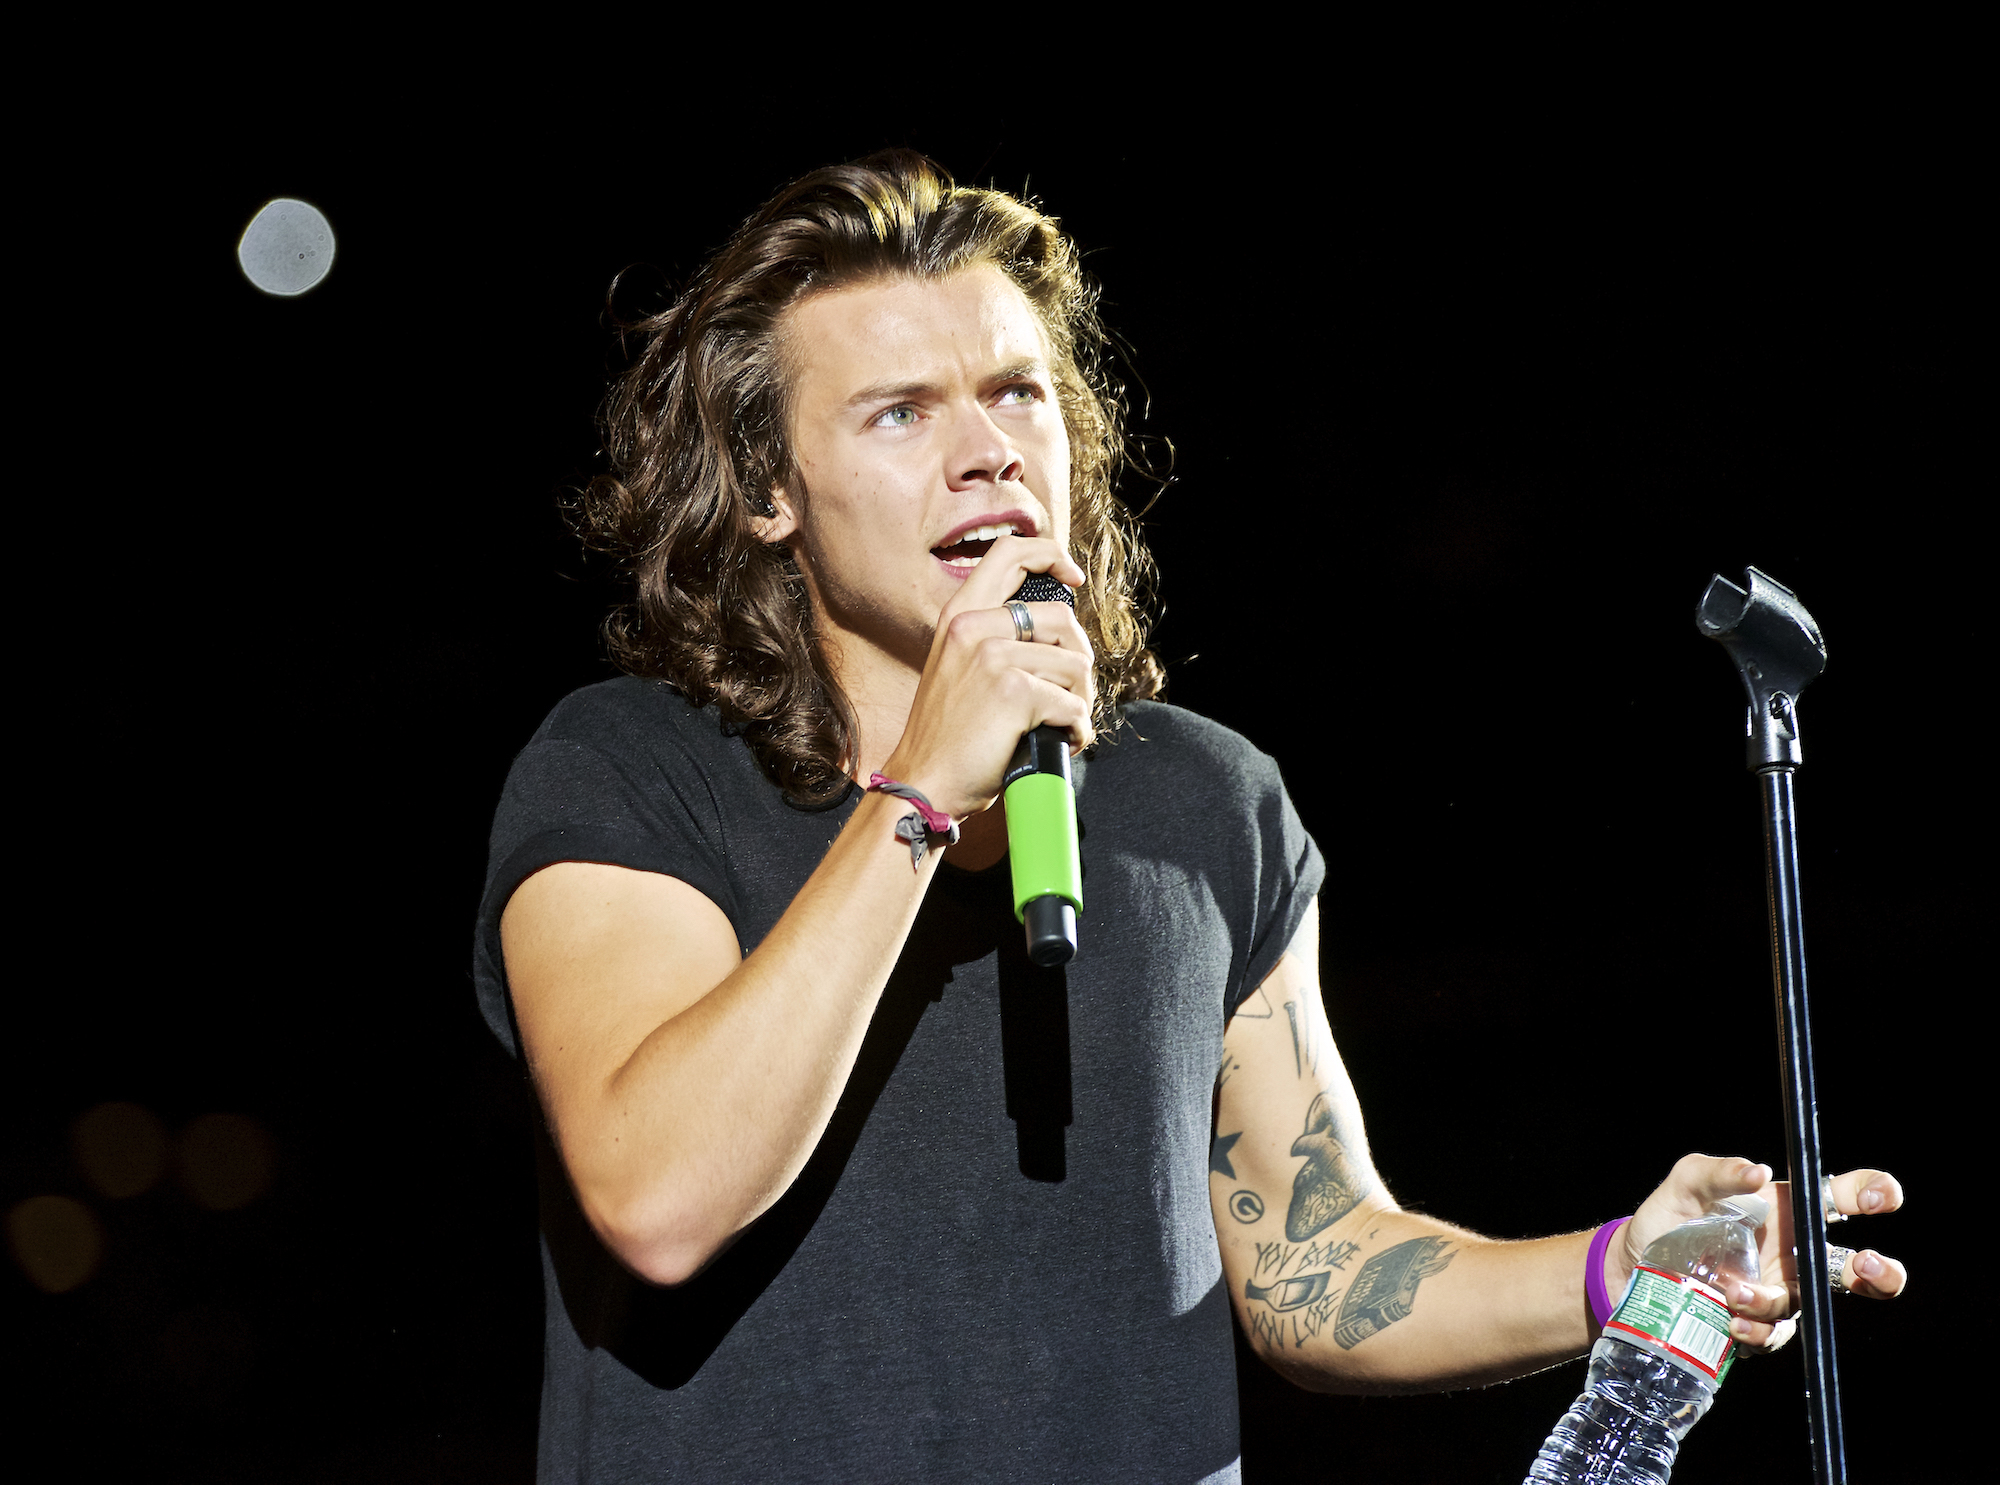 Harry Styles of One Direction performs at MetLife stadium on Aug. 5, 2015, in East Rutherford, N.J. (Robert Altman—Invision/AP)